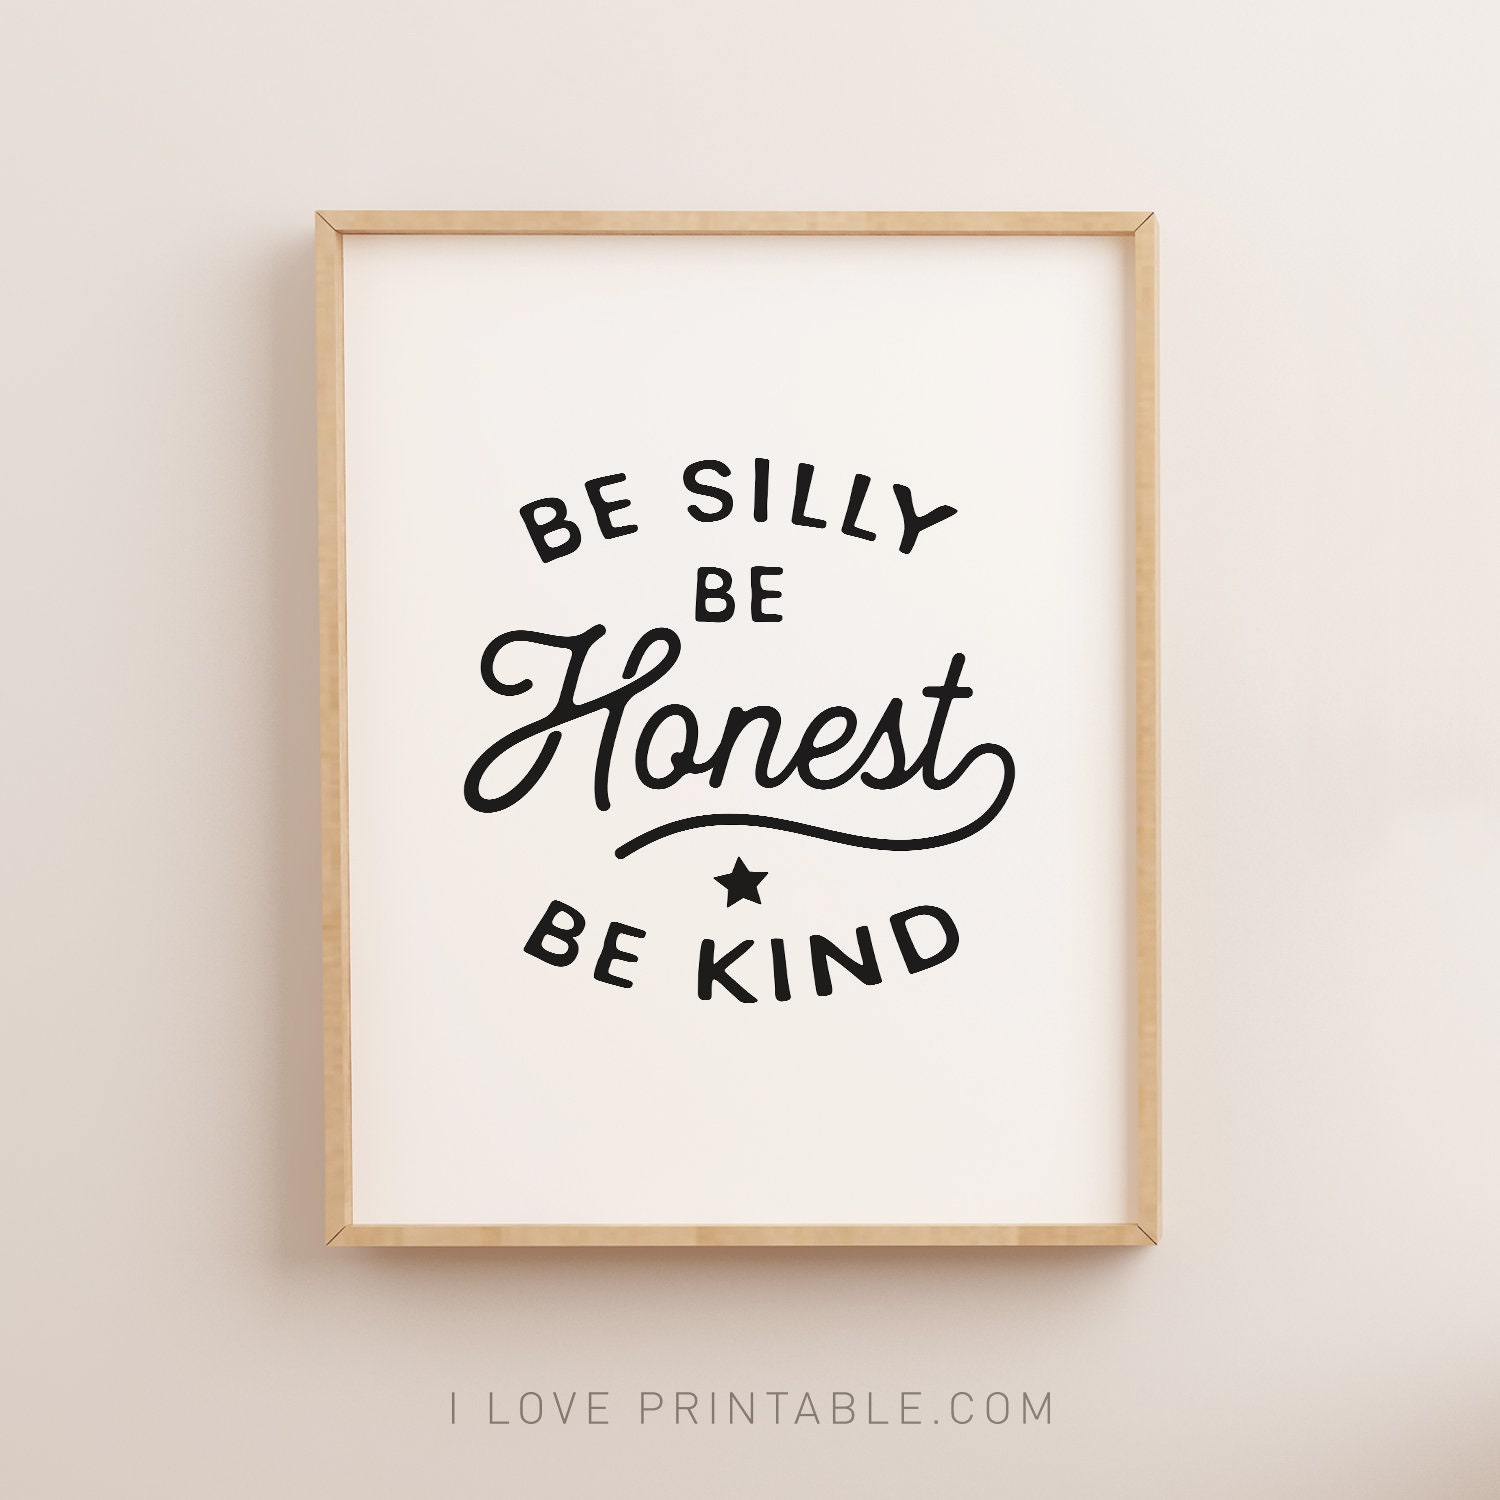 Be Kind,Be Silly,Be Silly Be Honest,Instant Download,Printable Wall Art,Printable Art,Be Honest,Silly,Funny,Home Decor,Wall Art,Dorm Decor